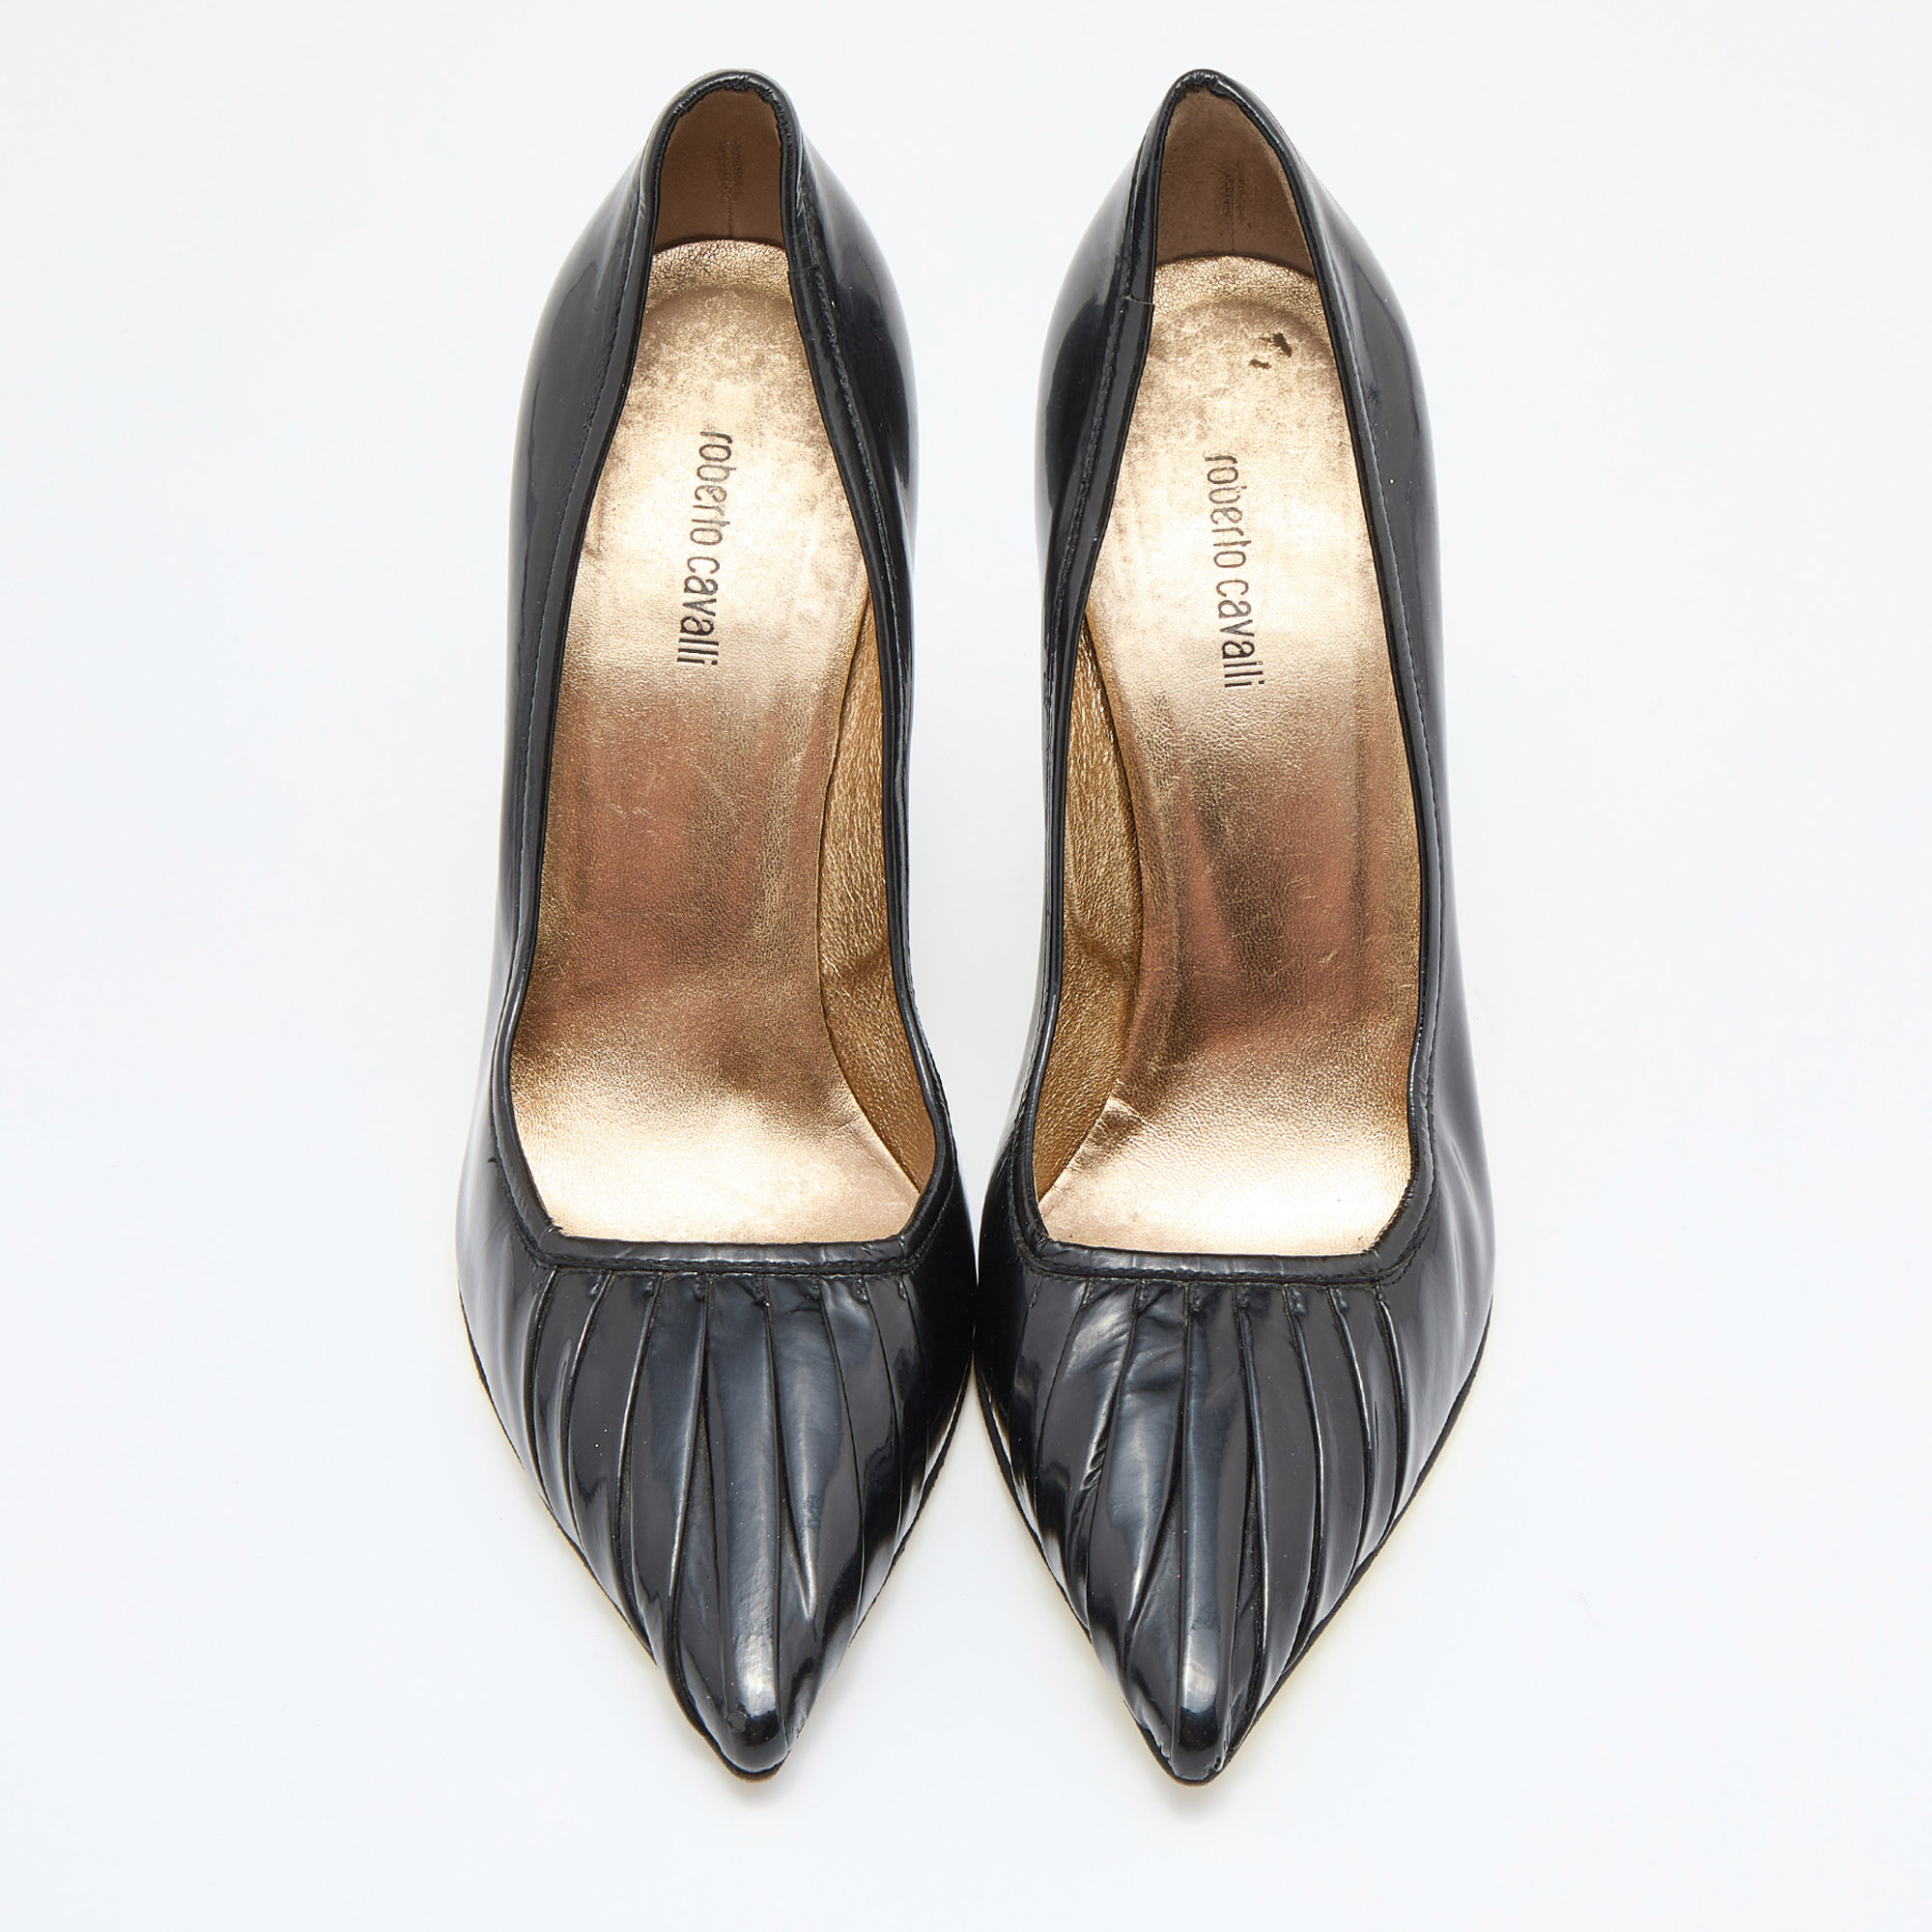 Roberto Cavalli Black Pleated Patent Leather Pointed Toe Pumps Size 36.5